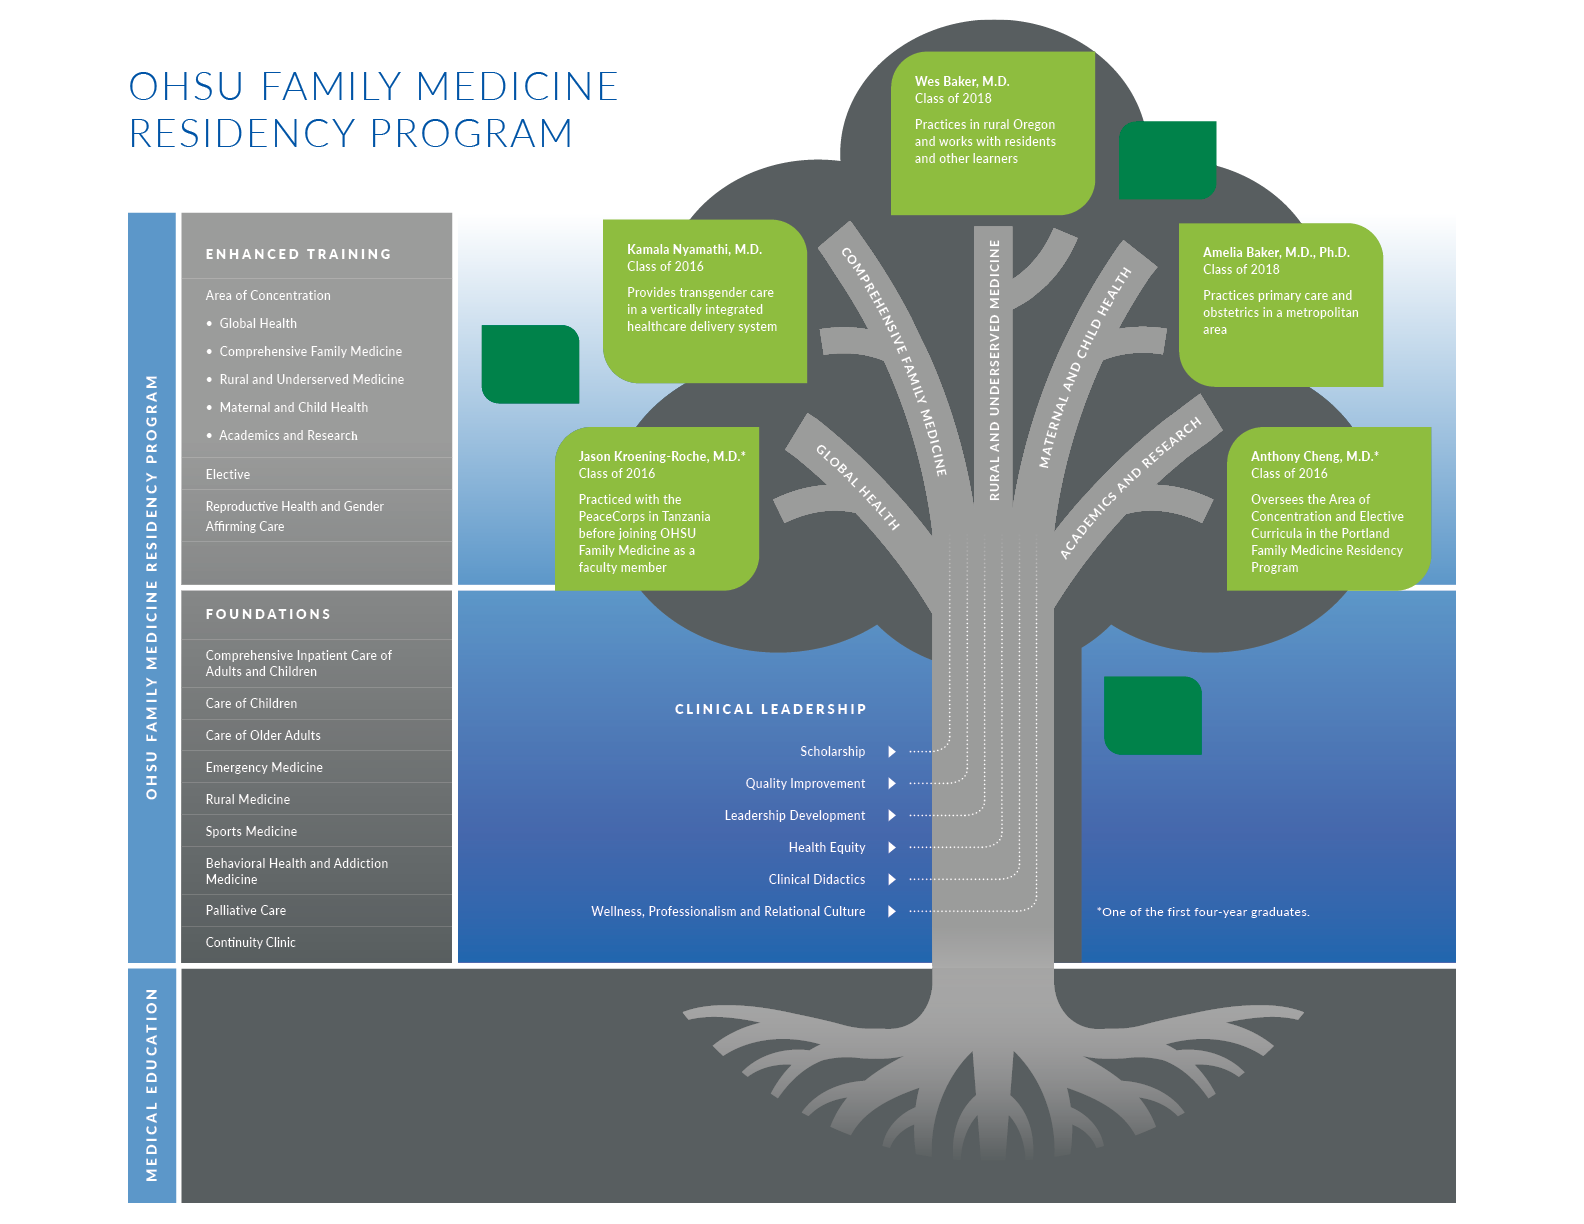 Graphic of a tree with roots, trunk, branches, and leaves illustrating a resident's path from med school to practice